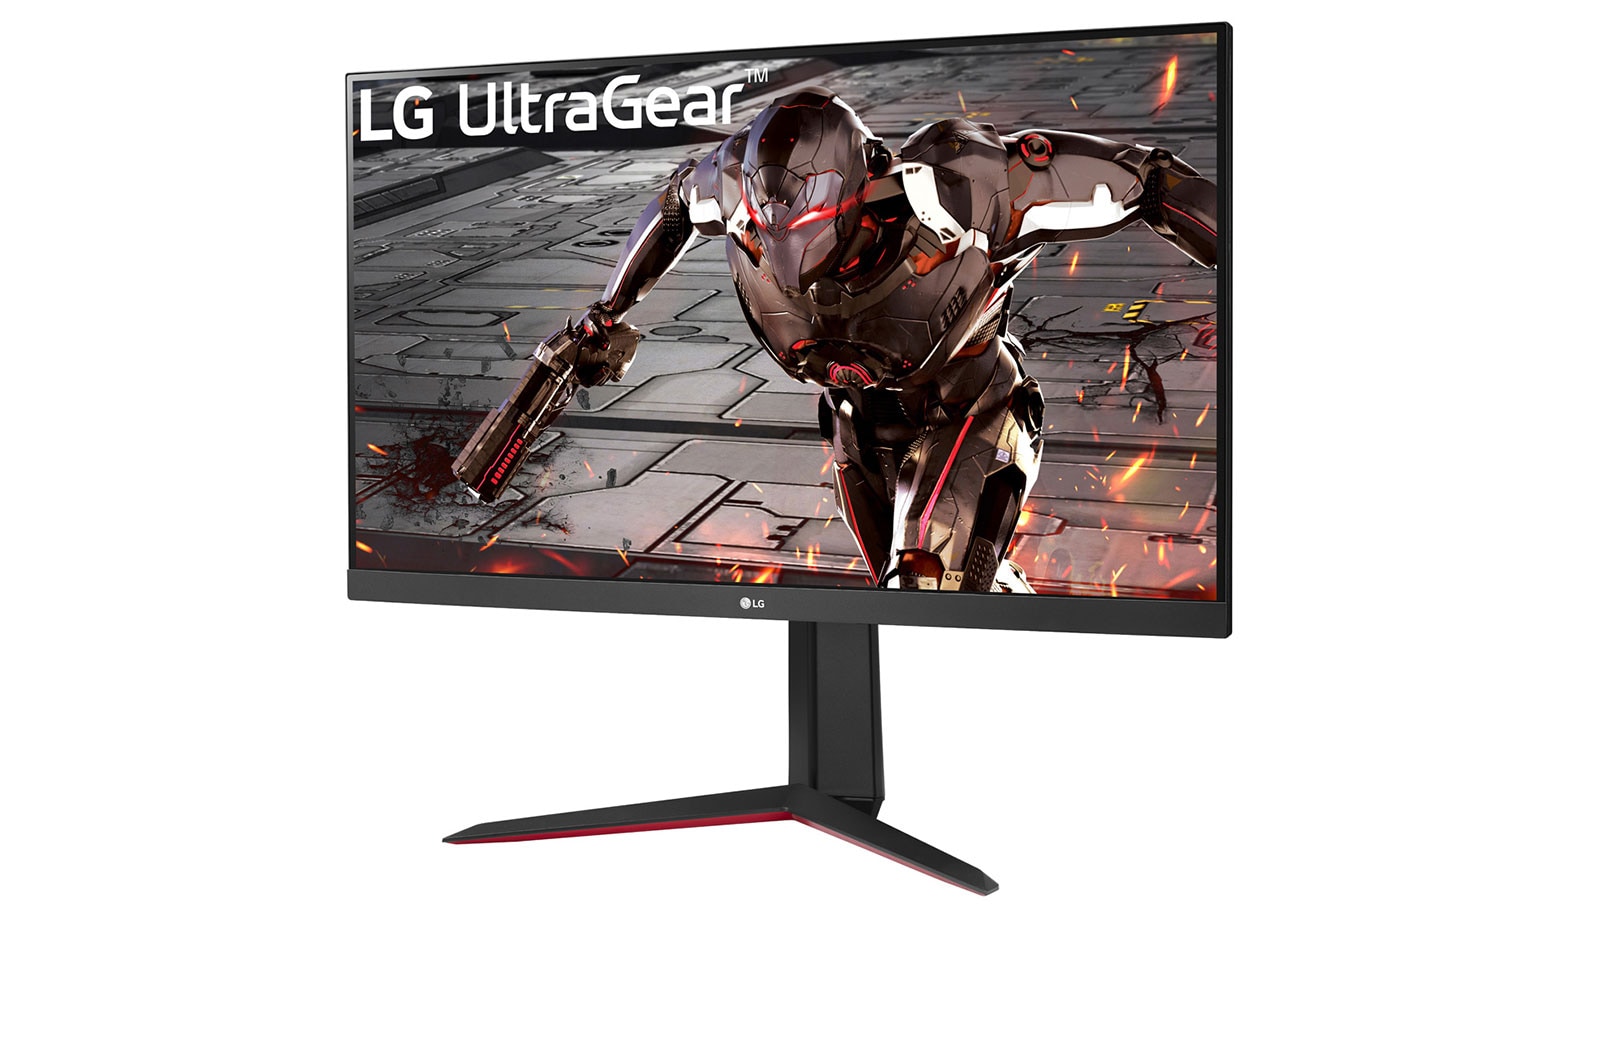 LG UltraGear 32GN650, 32''165Hz Refresh Rate, 1ms MBR Response Time QHD Monitor